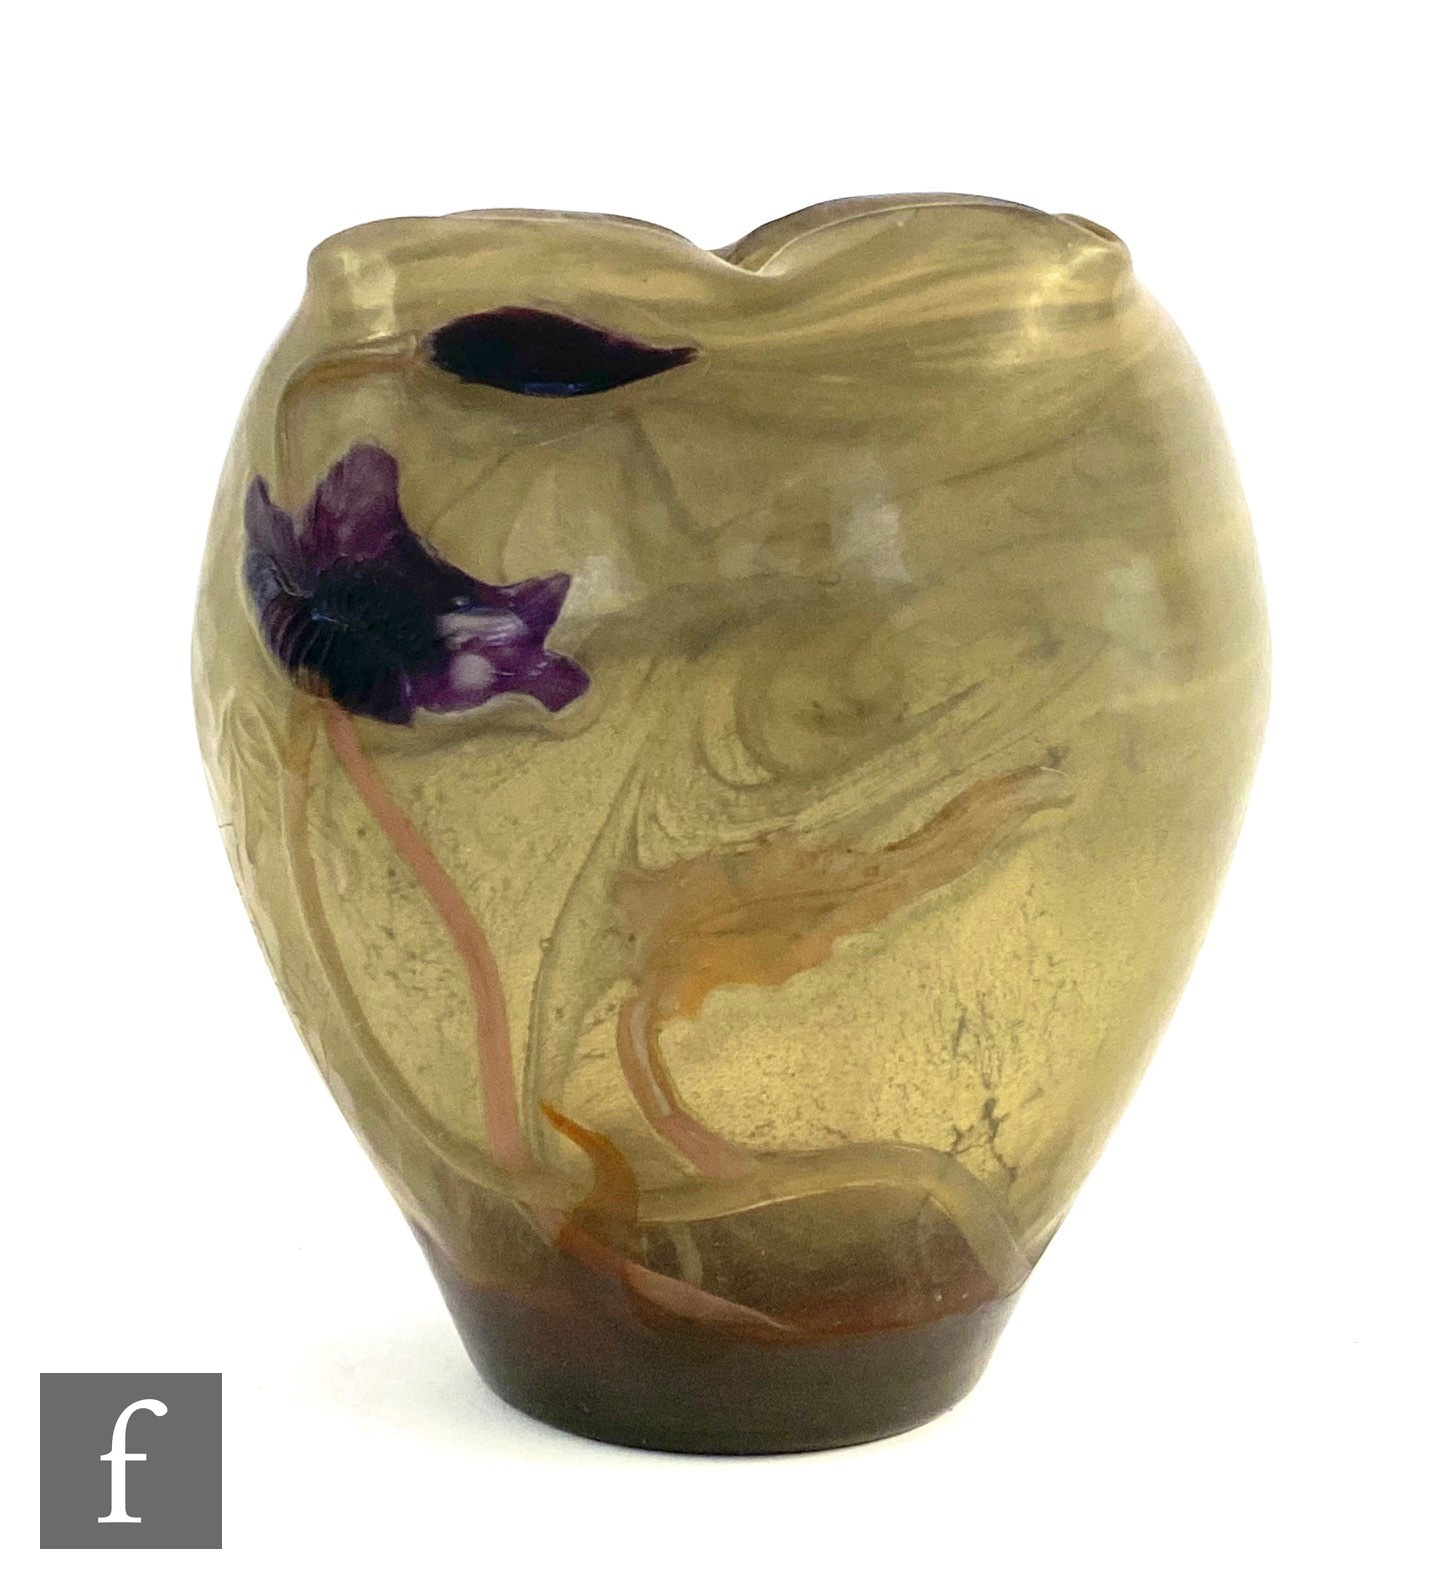 Emile Galle - A Marqueterie-sur-verre Intercalaire vase circa 1900, the vase of tapered compressed - Image 3 of 12